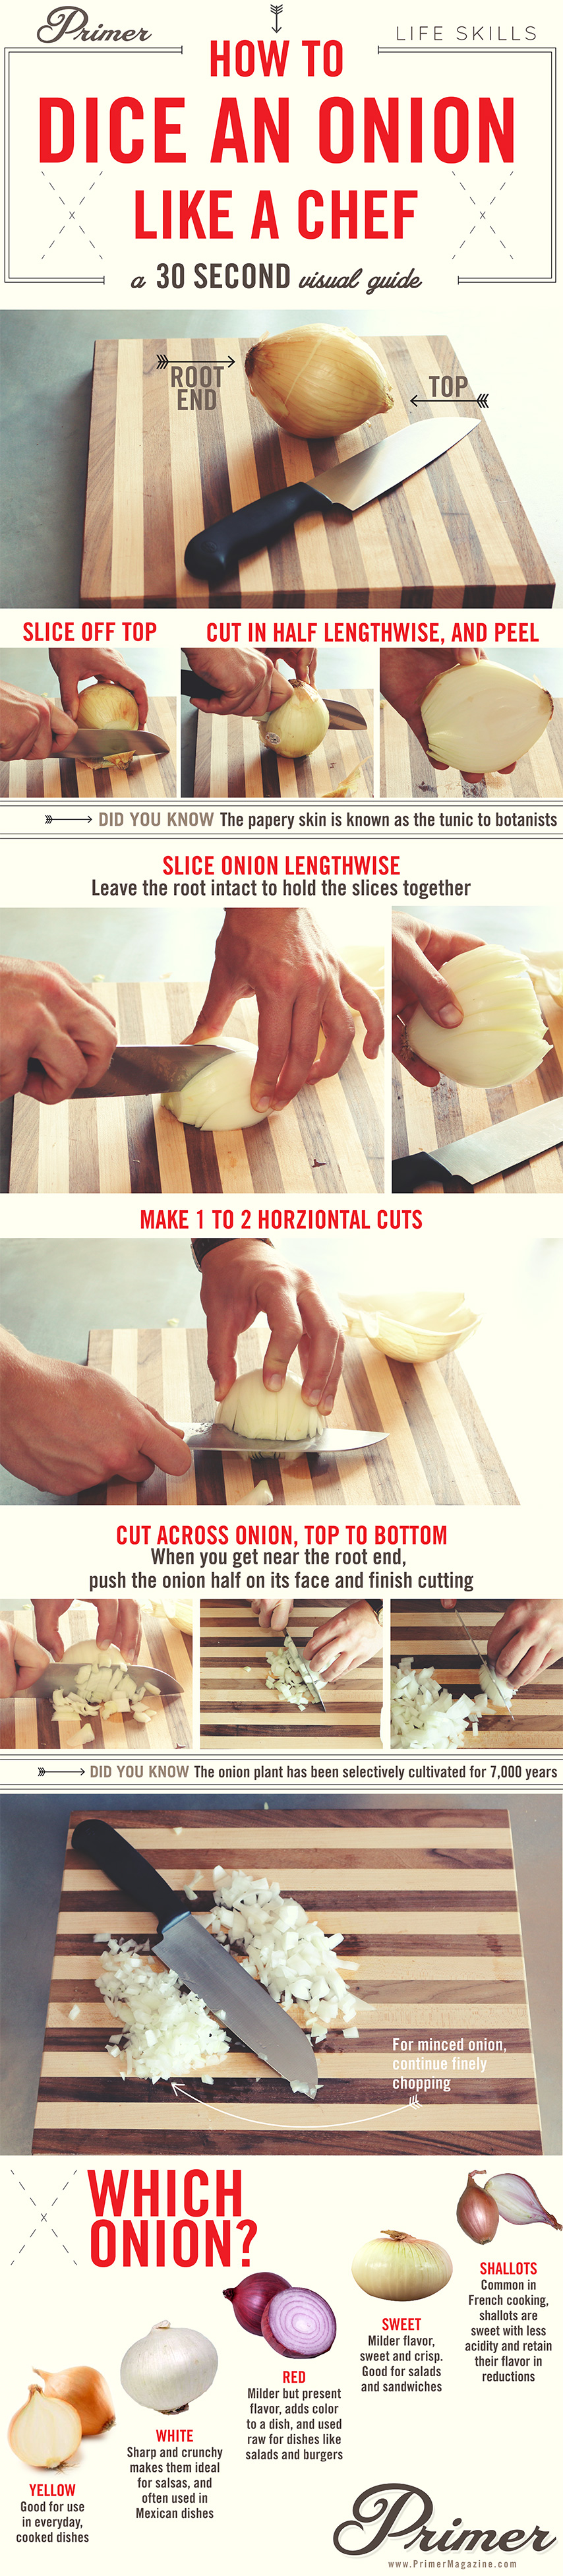 How to Cut an Onion